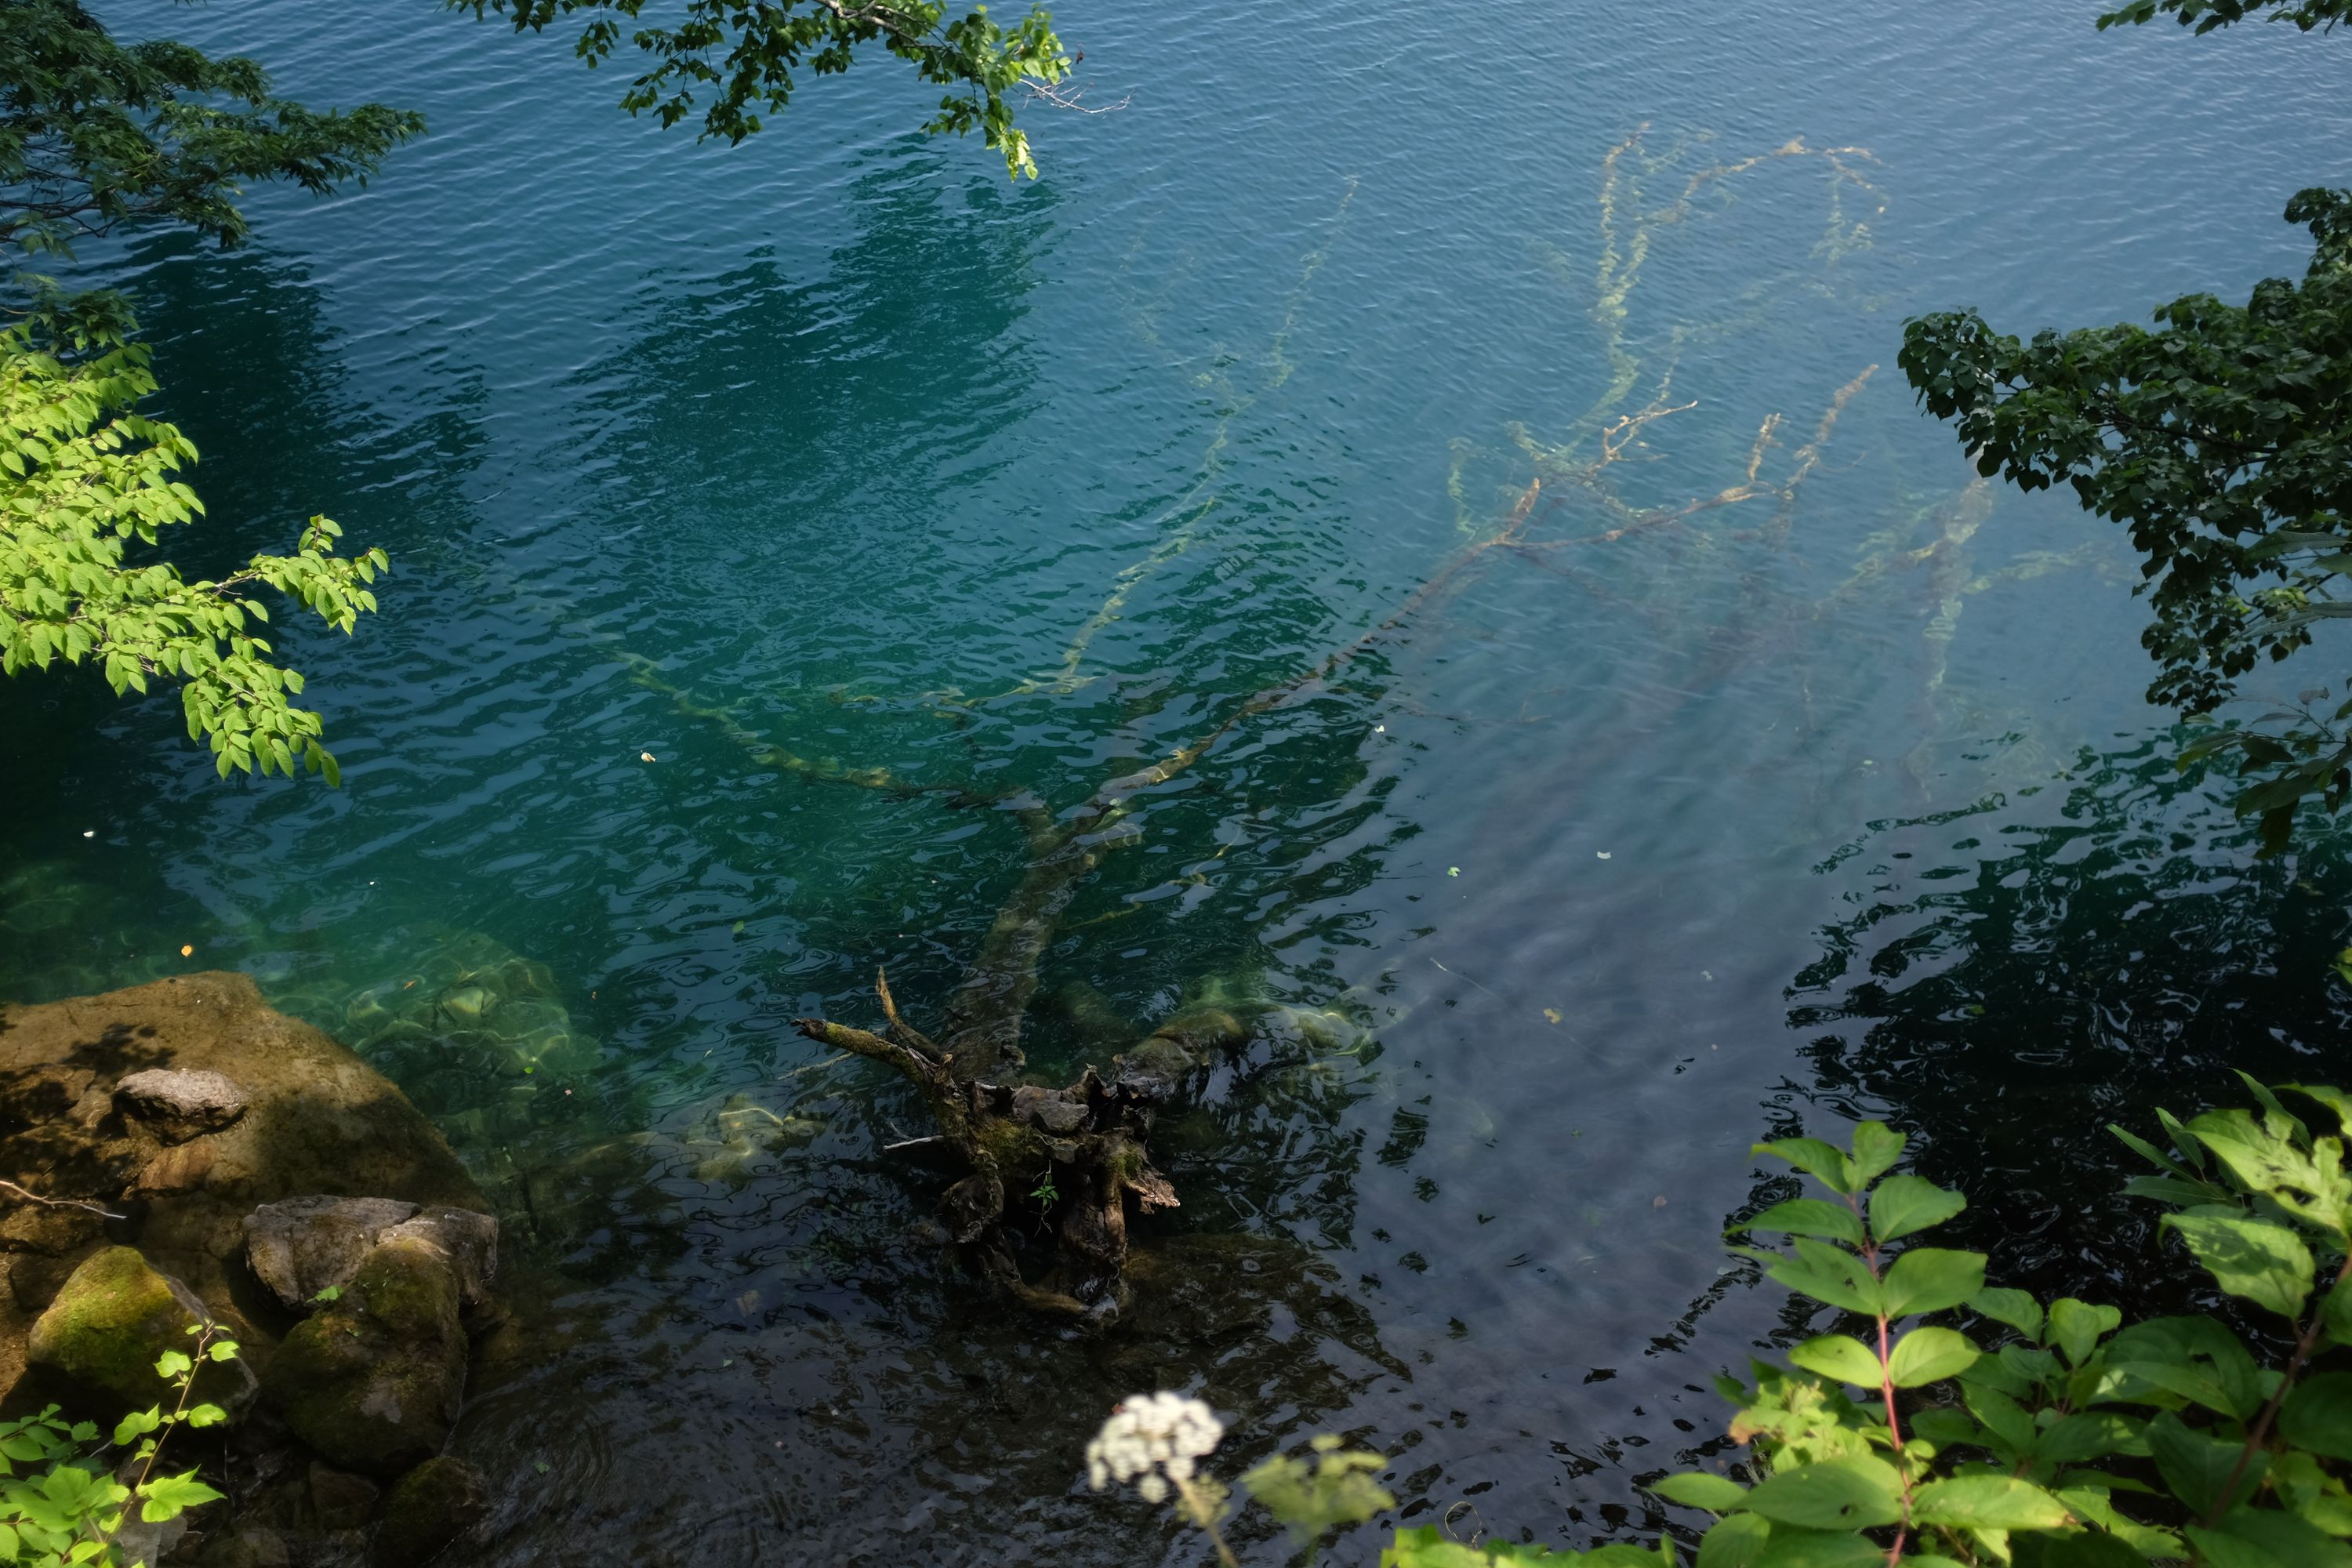 A tree half-submerged in the very clear blue waters of the lake.